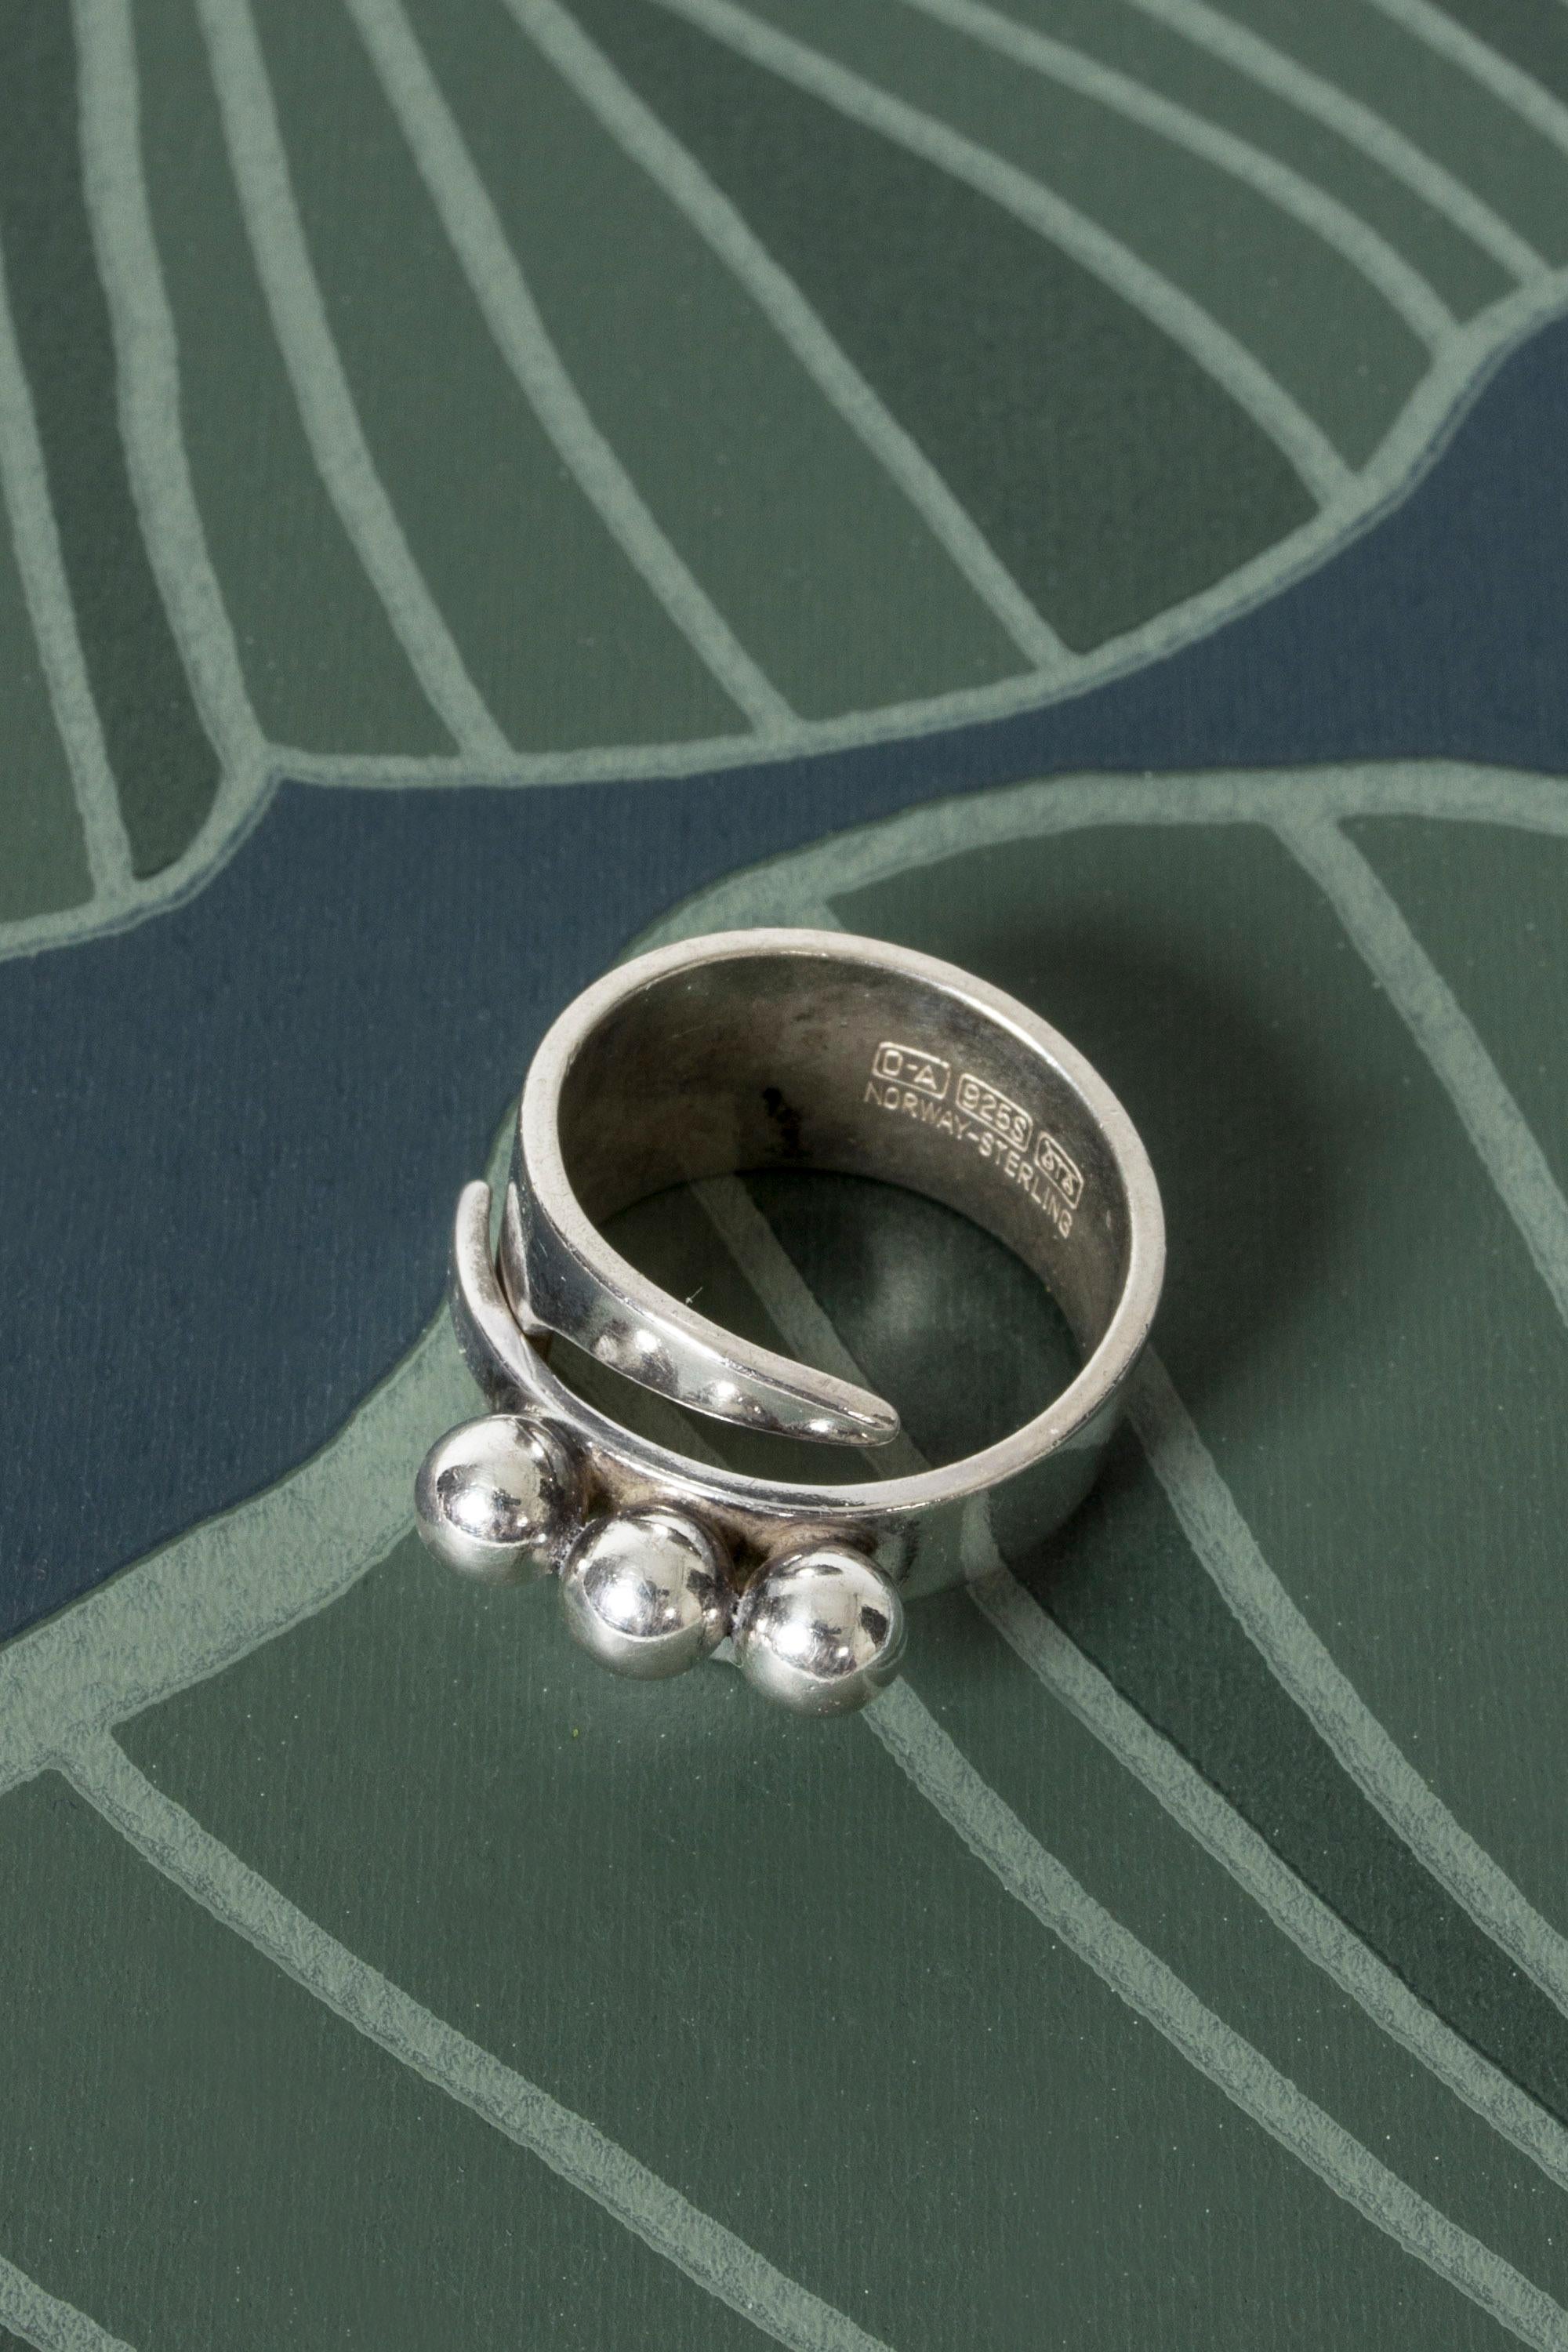 Cool silver ring from David Andersen, that spirals around the finger. Adorned with three silver balls. Expressive, easy to wear.